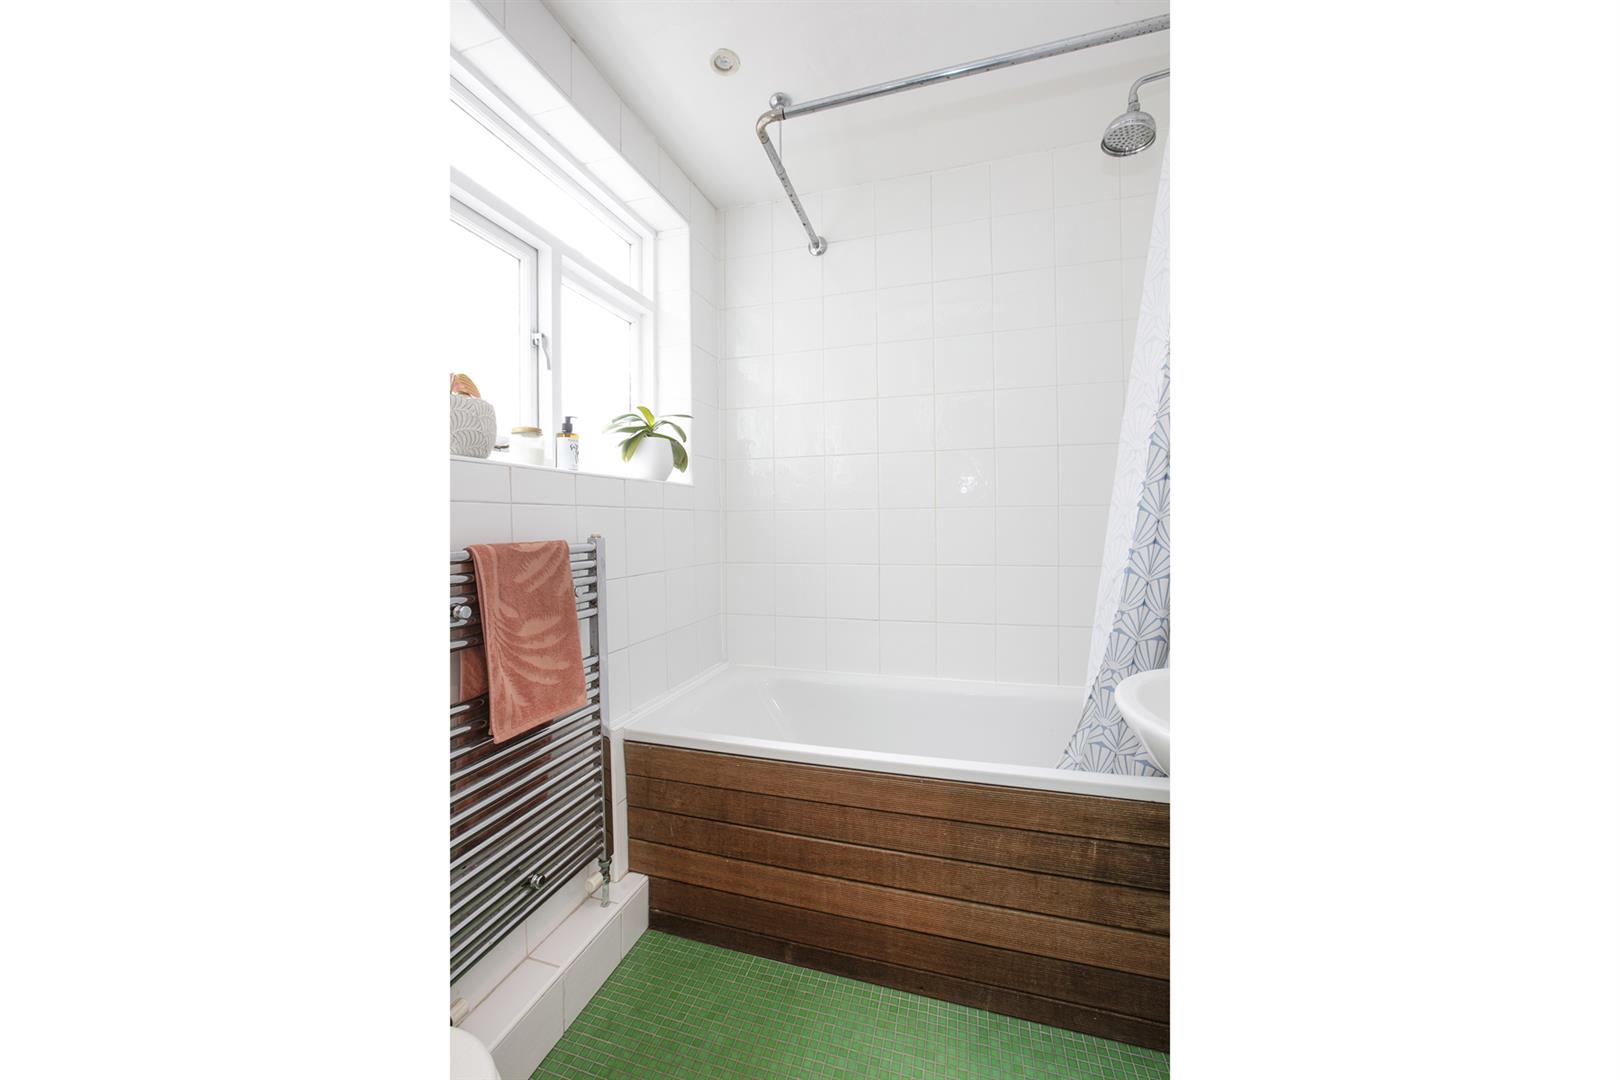 Flat - Conversion For Sale in Peckham Road, Camberwell, SE5 859 view11